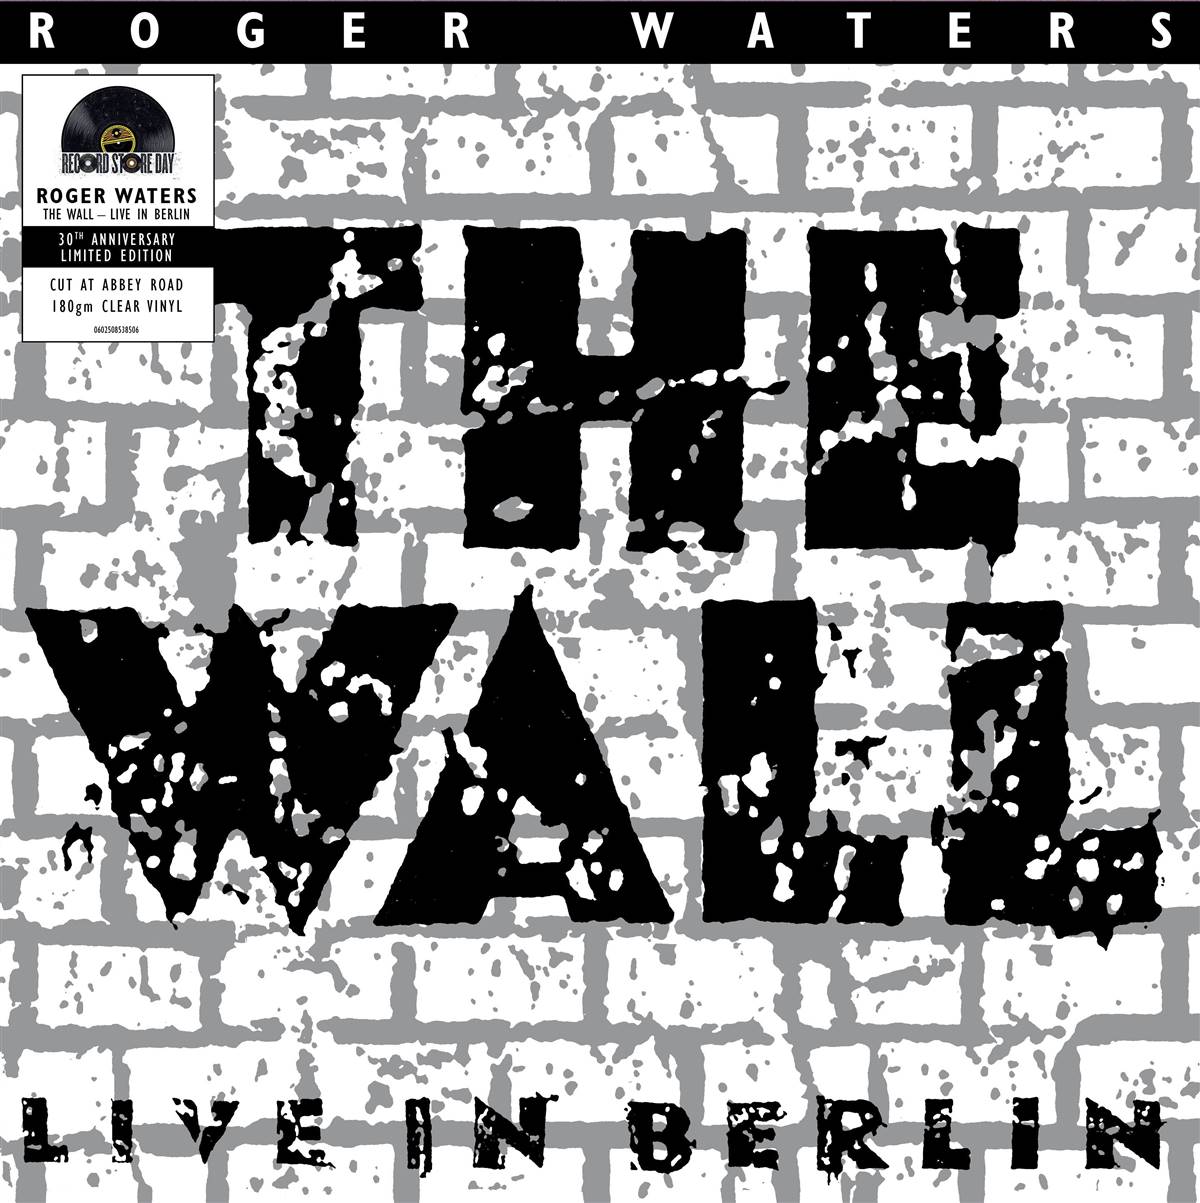 Roger Waters - The Wall 2LP (RSD 2020 Exclusive, Limited to 8000, Gatefold, 30th Anniversary, 180g, Clear Vinyl)